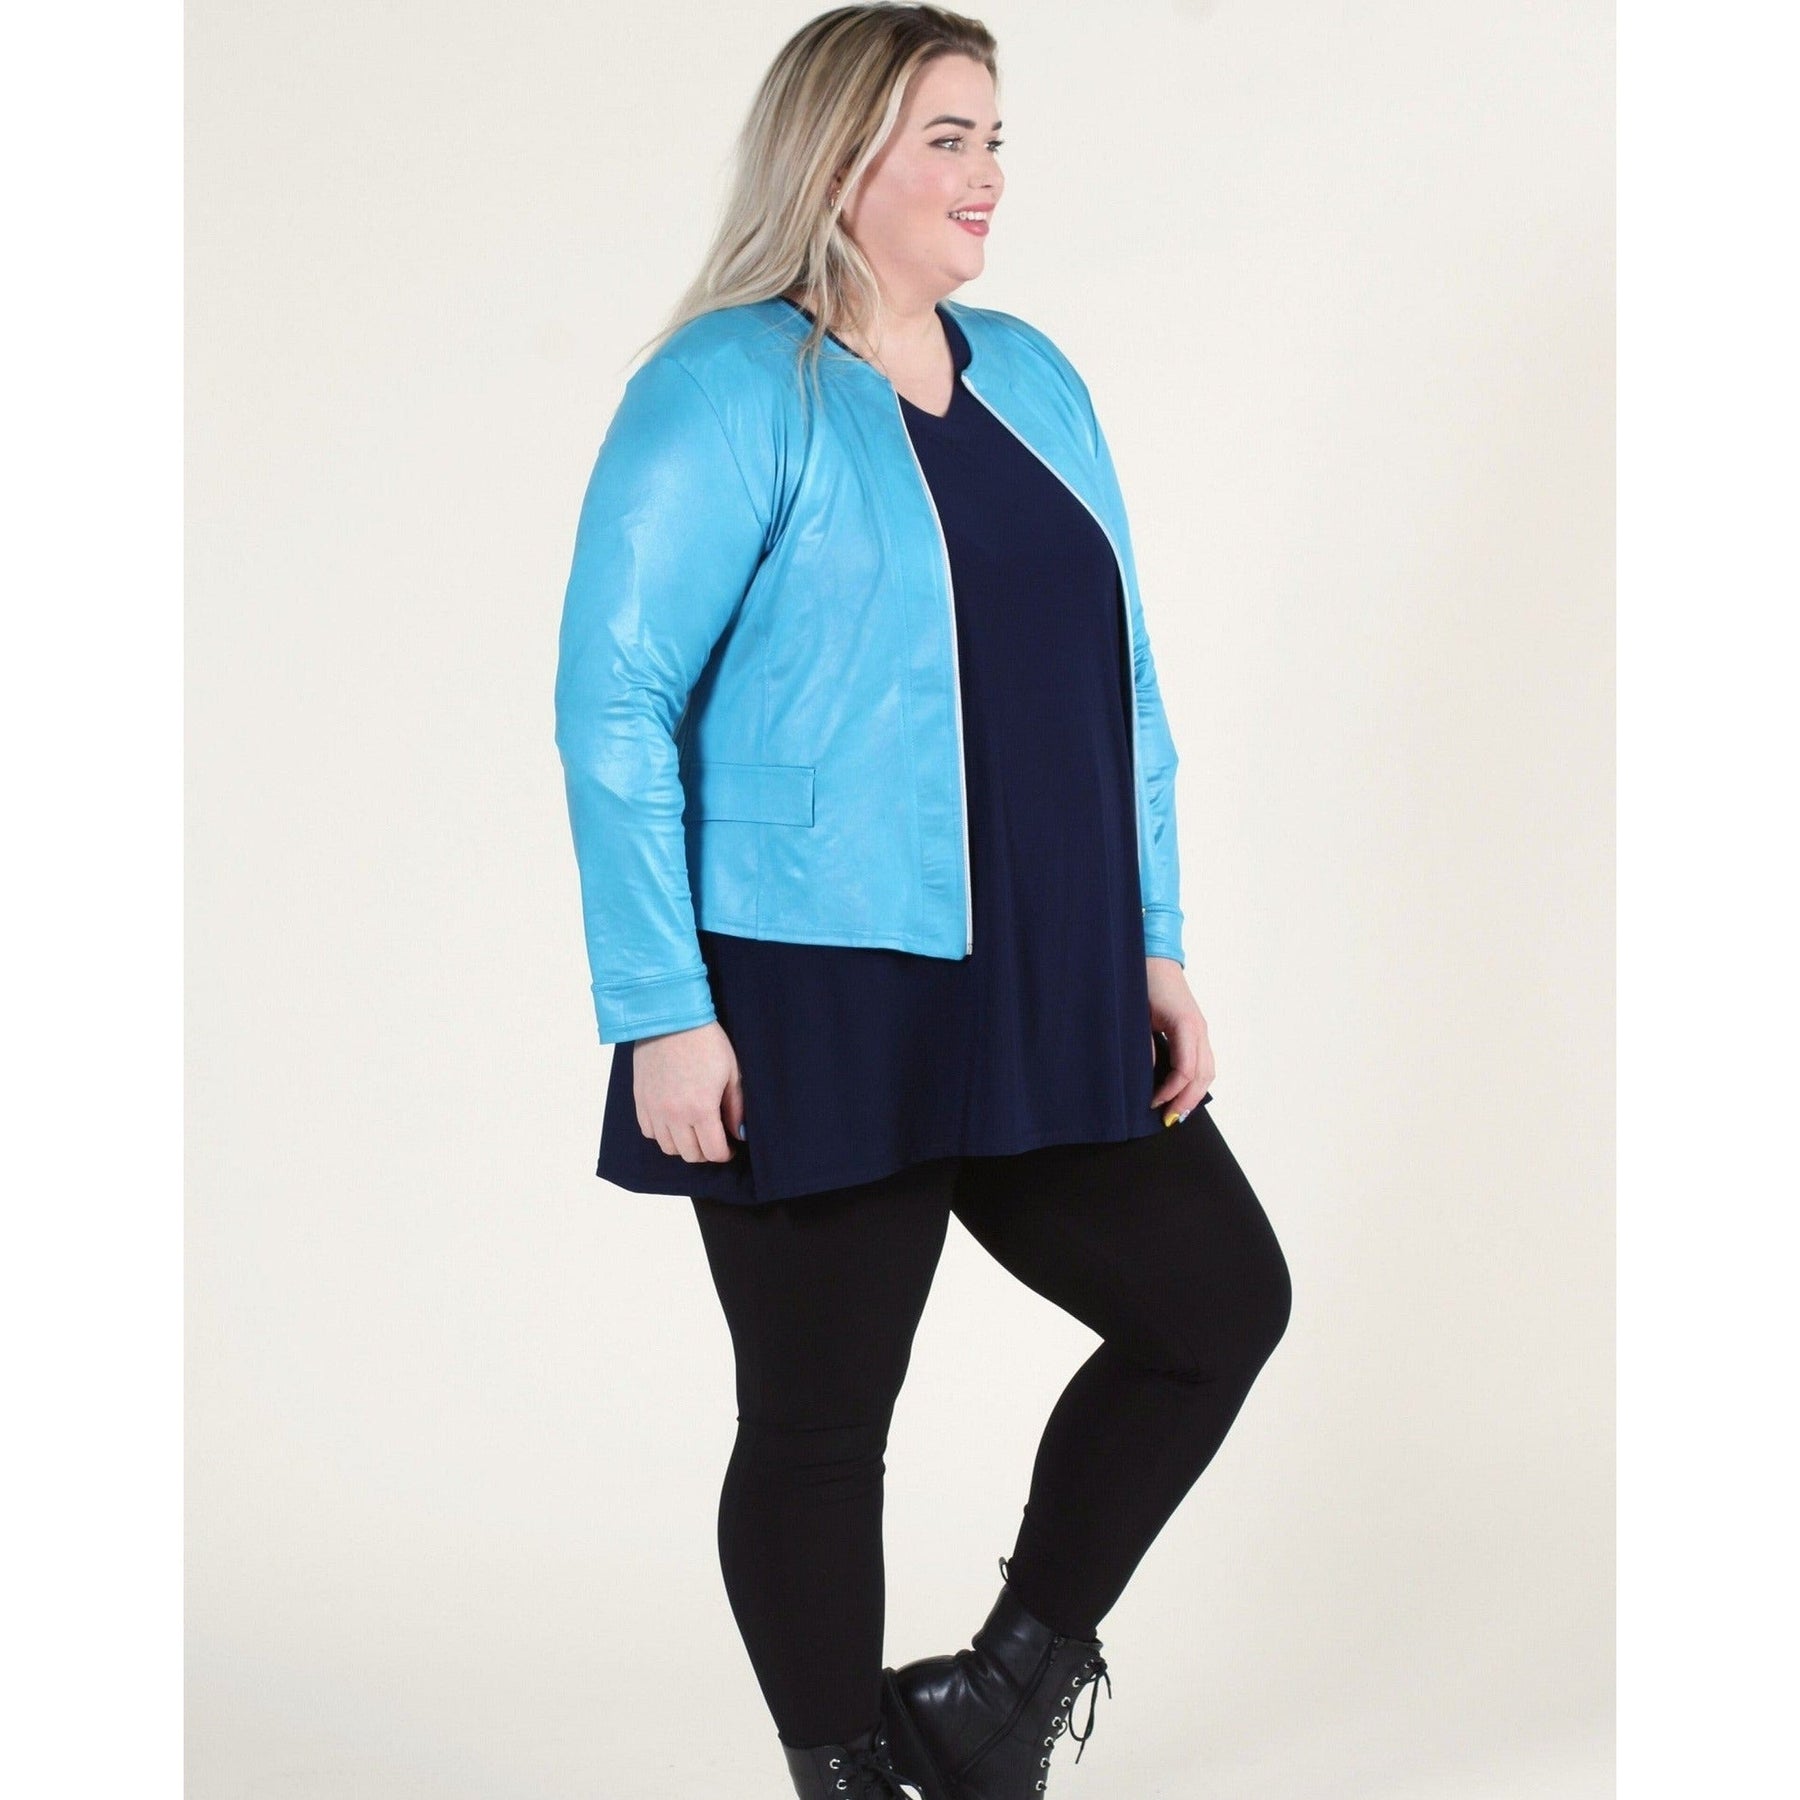 Magna Leather Look Jacket in Turquoise - Wardrobe Plus